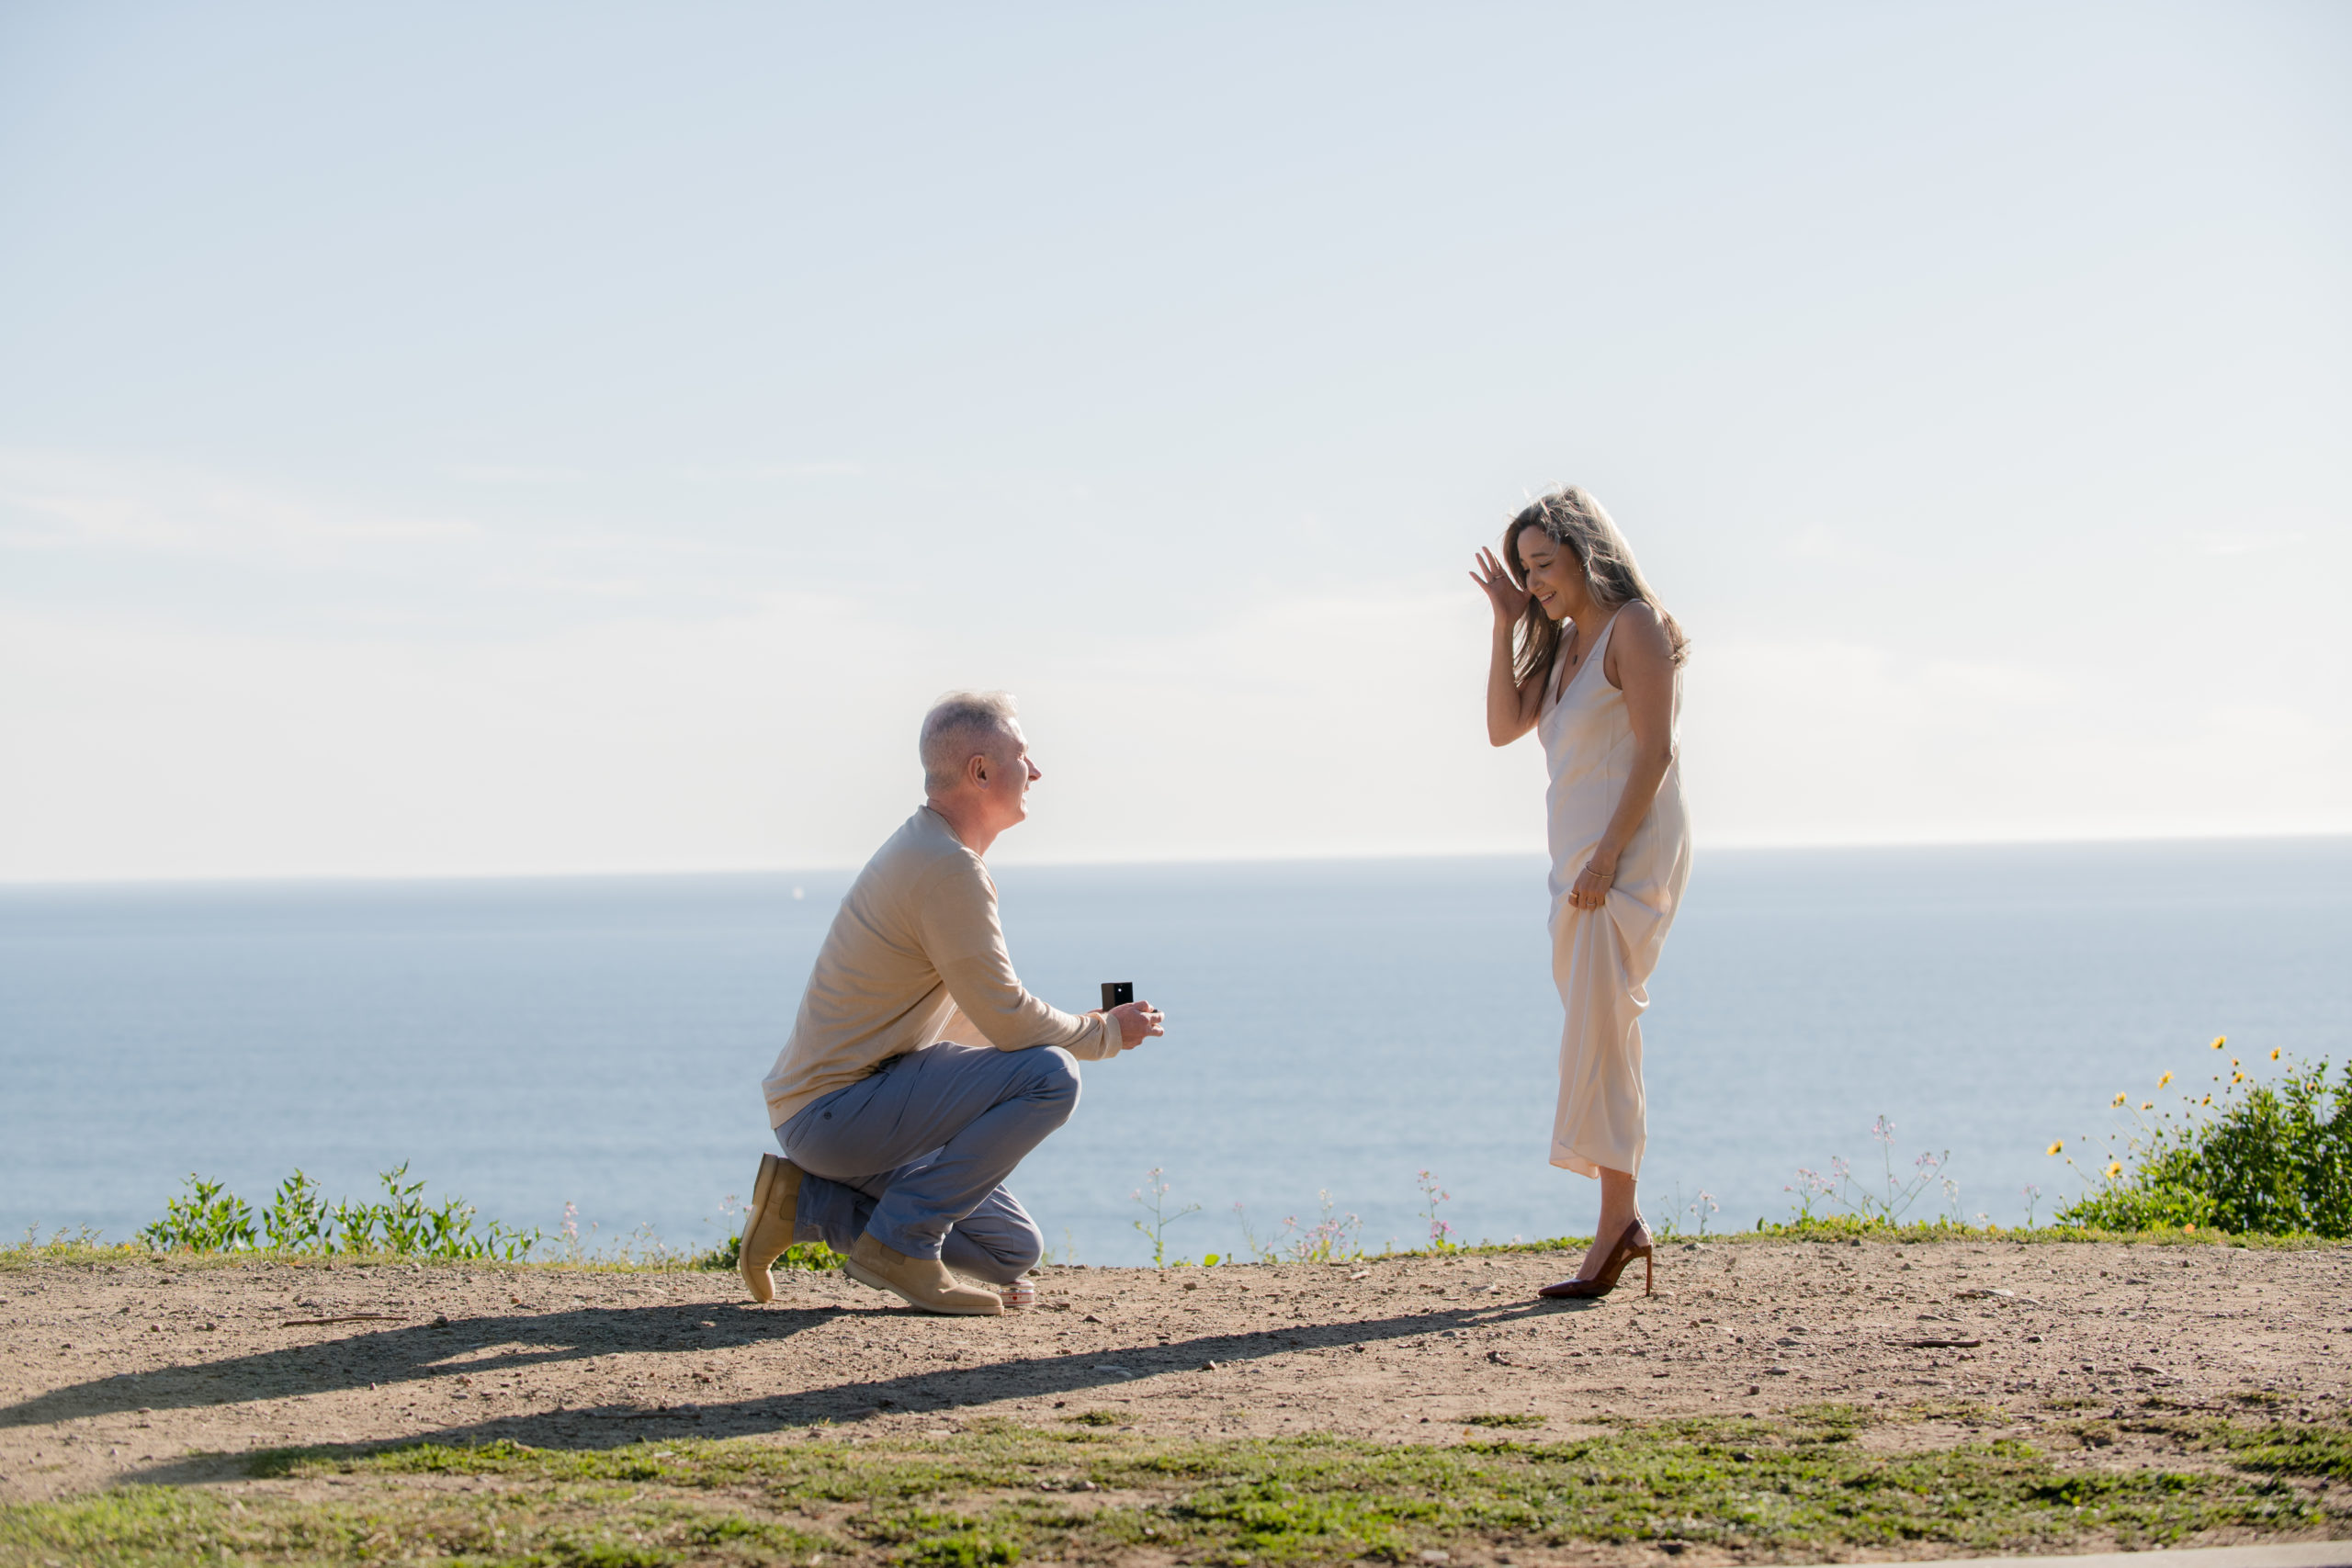  Surprise proposal at The Bluffs in Pacific Palisades